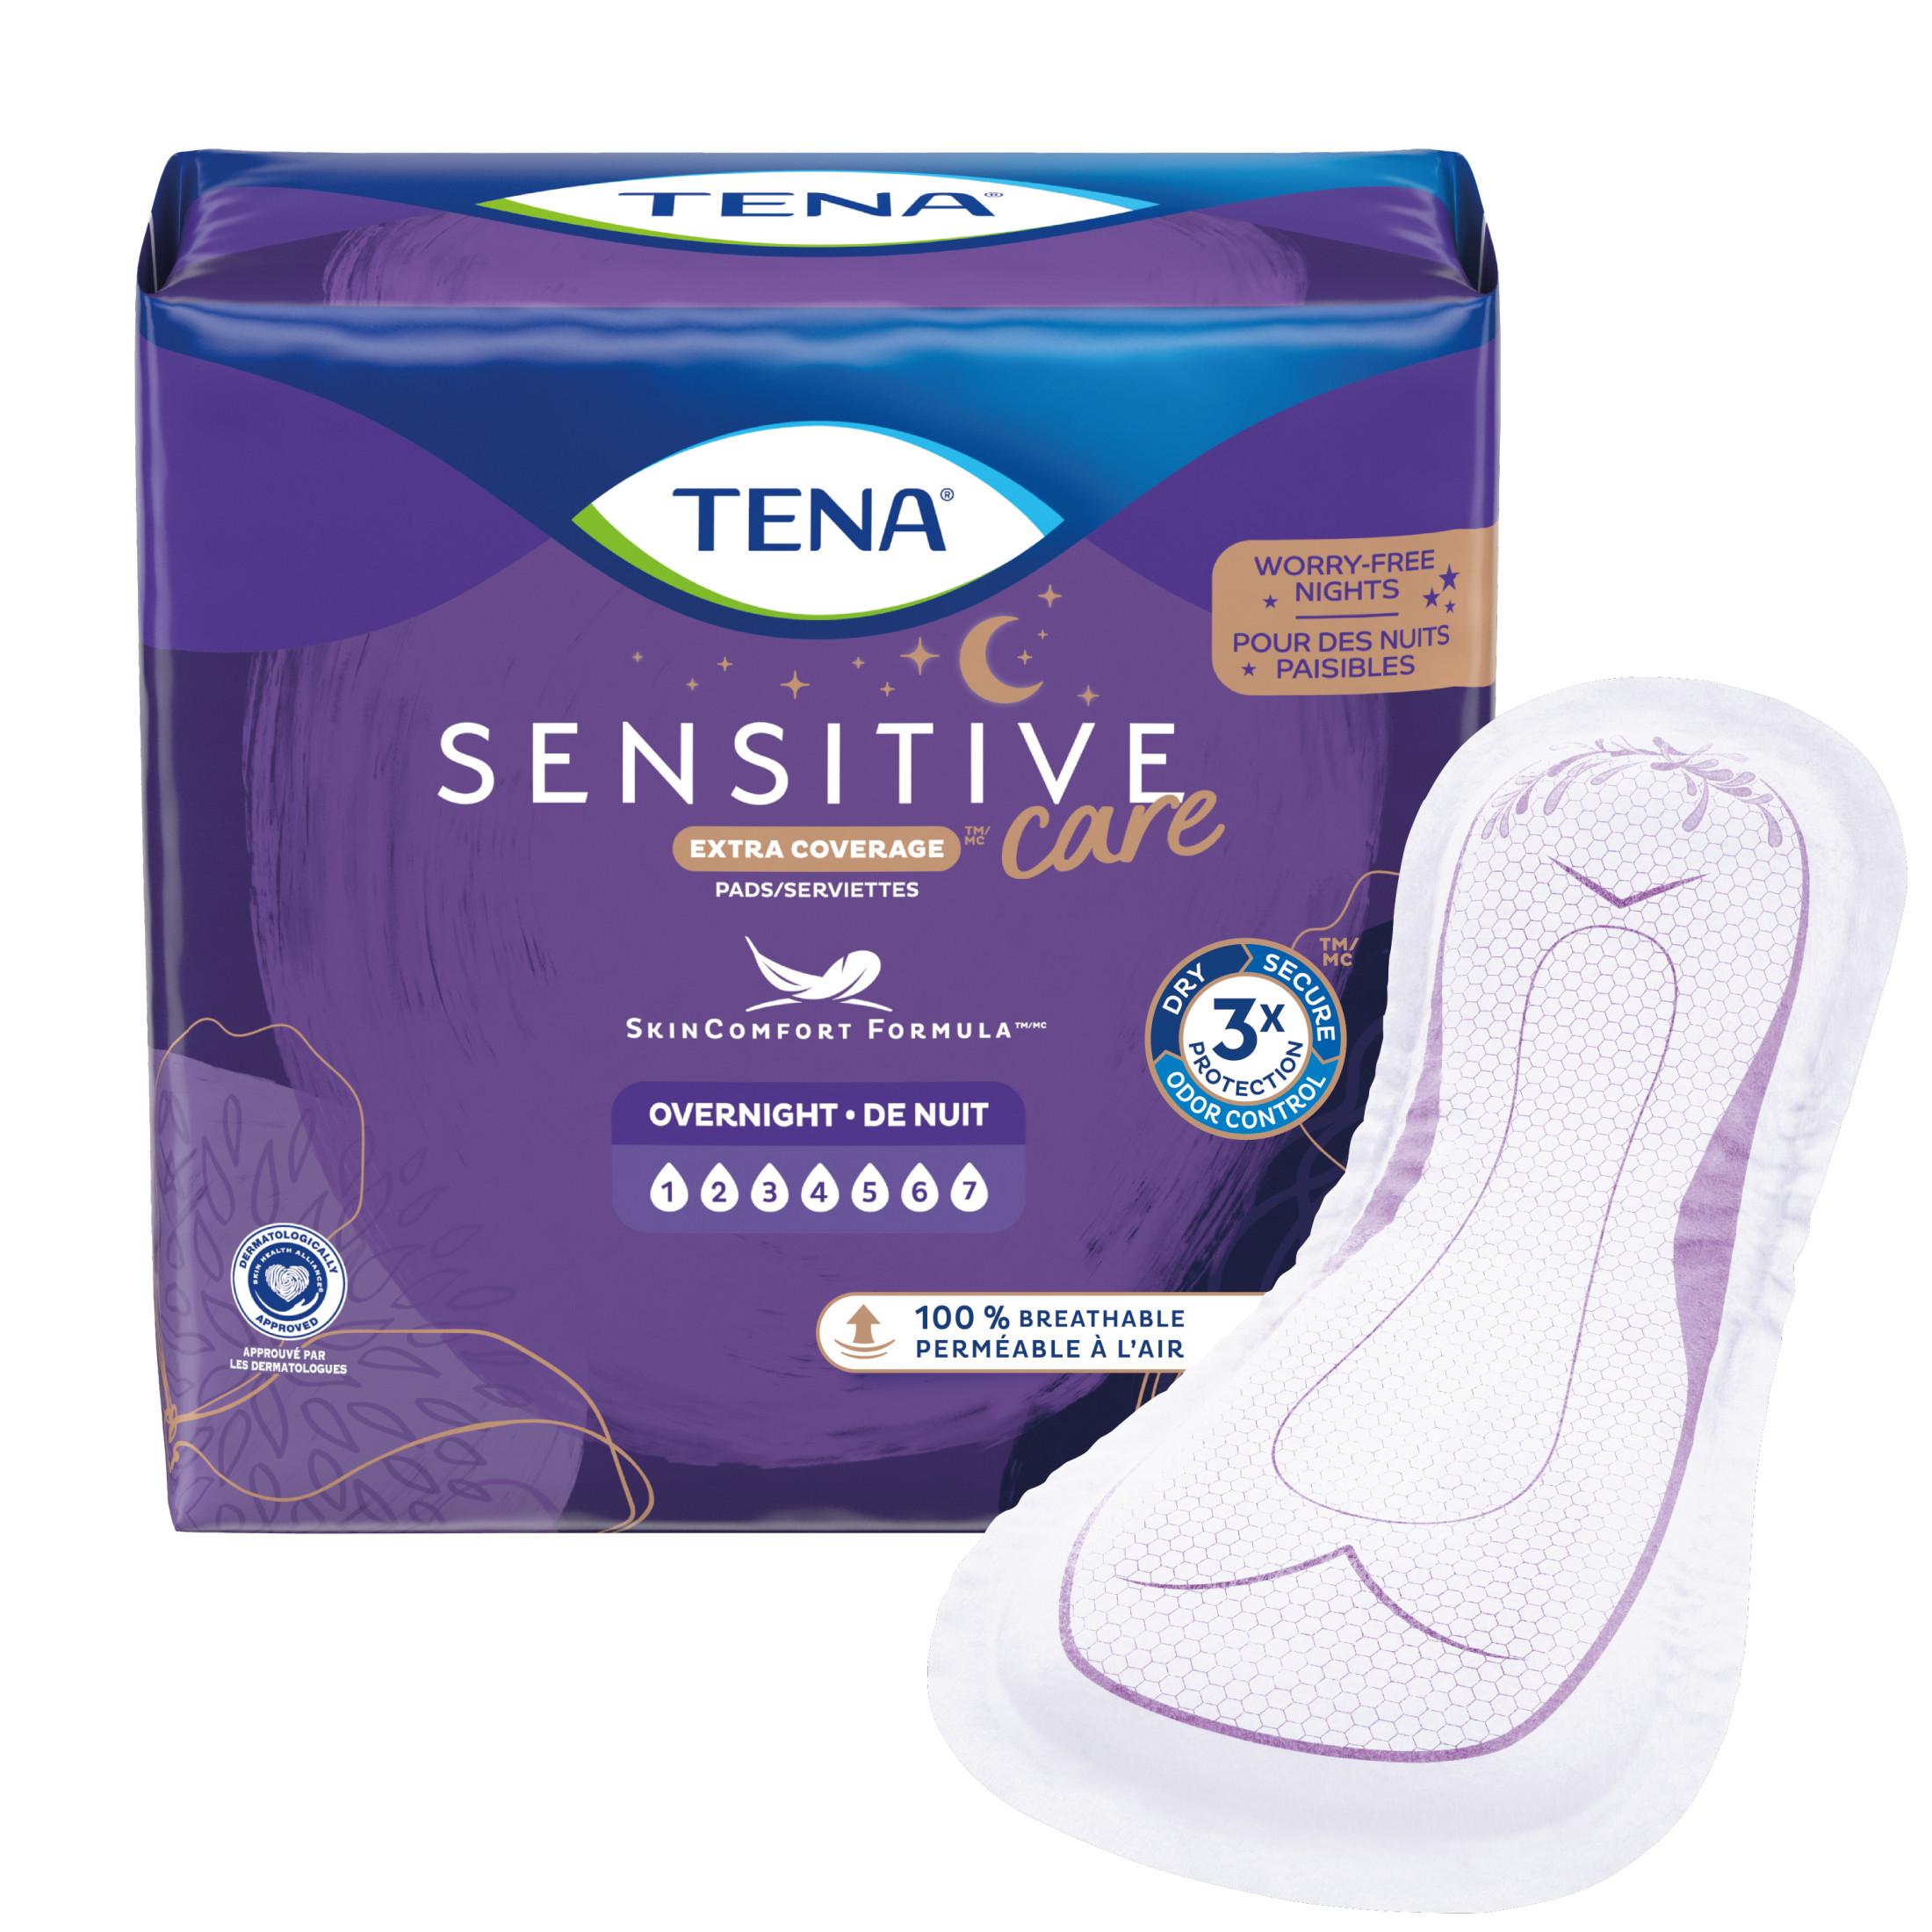 Tena Sensitive Care Extra Coverage Overnight Incontinence Pads, 45 Count - image 3 of 8